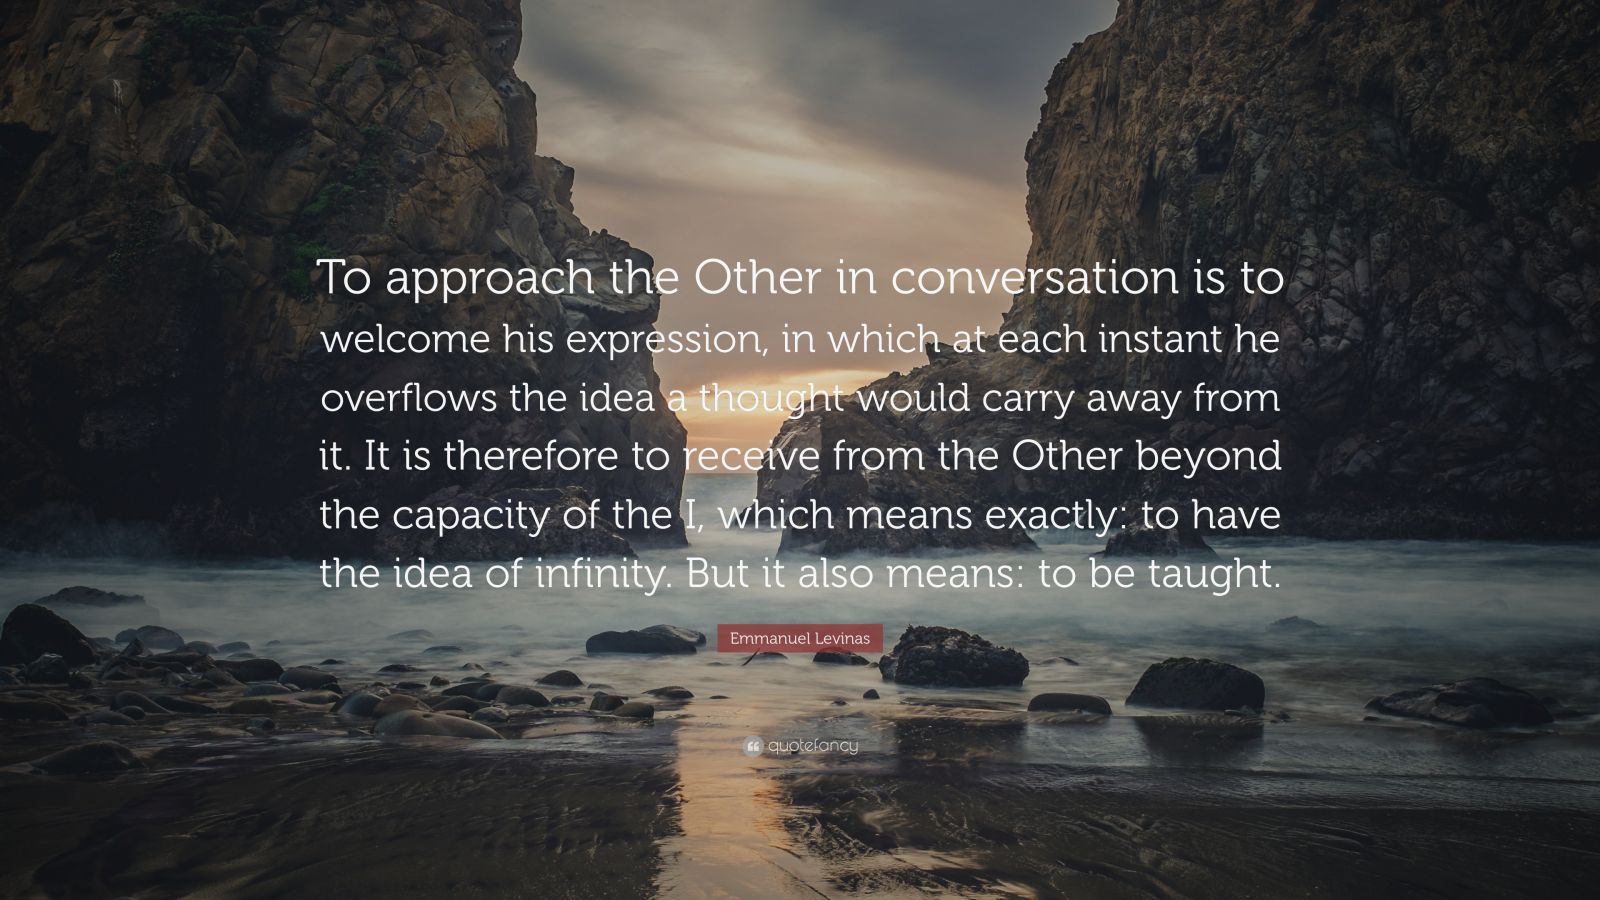 Emmanuel Levinas Quote: “To approach the Other in conversation is to ...